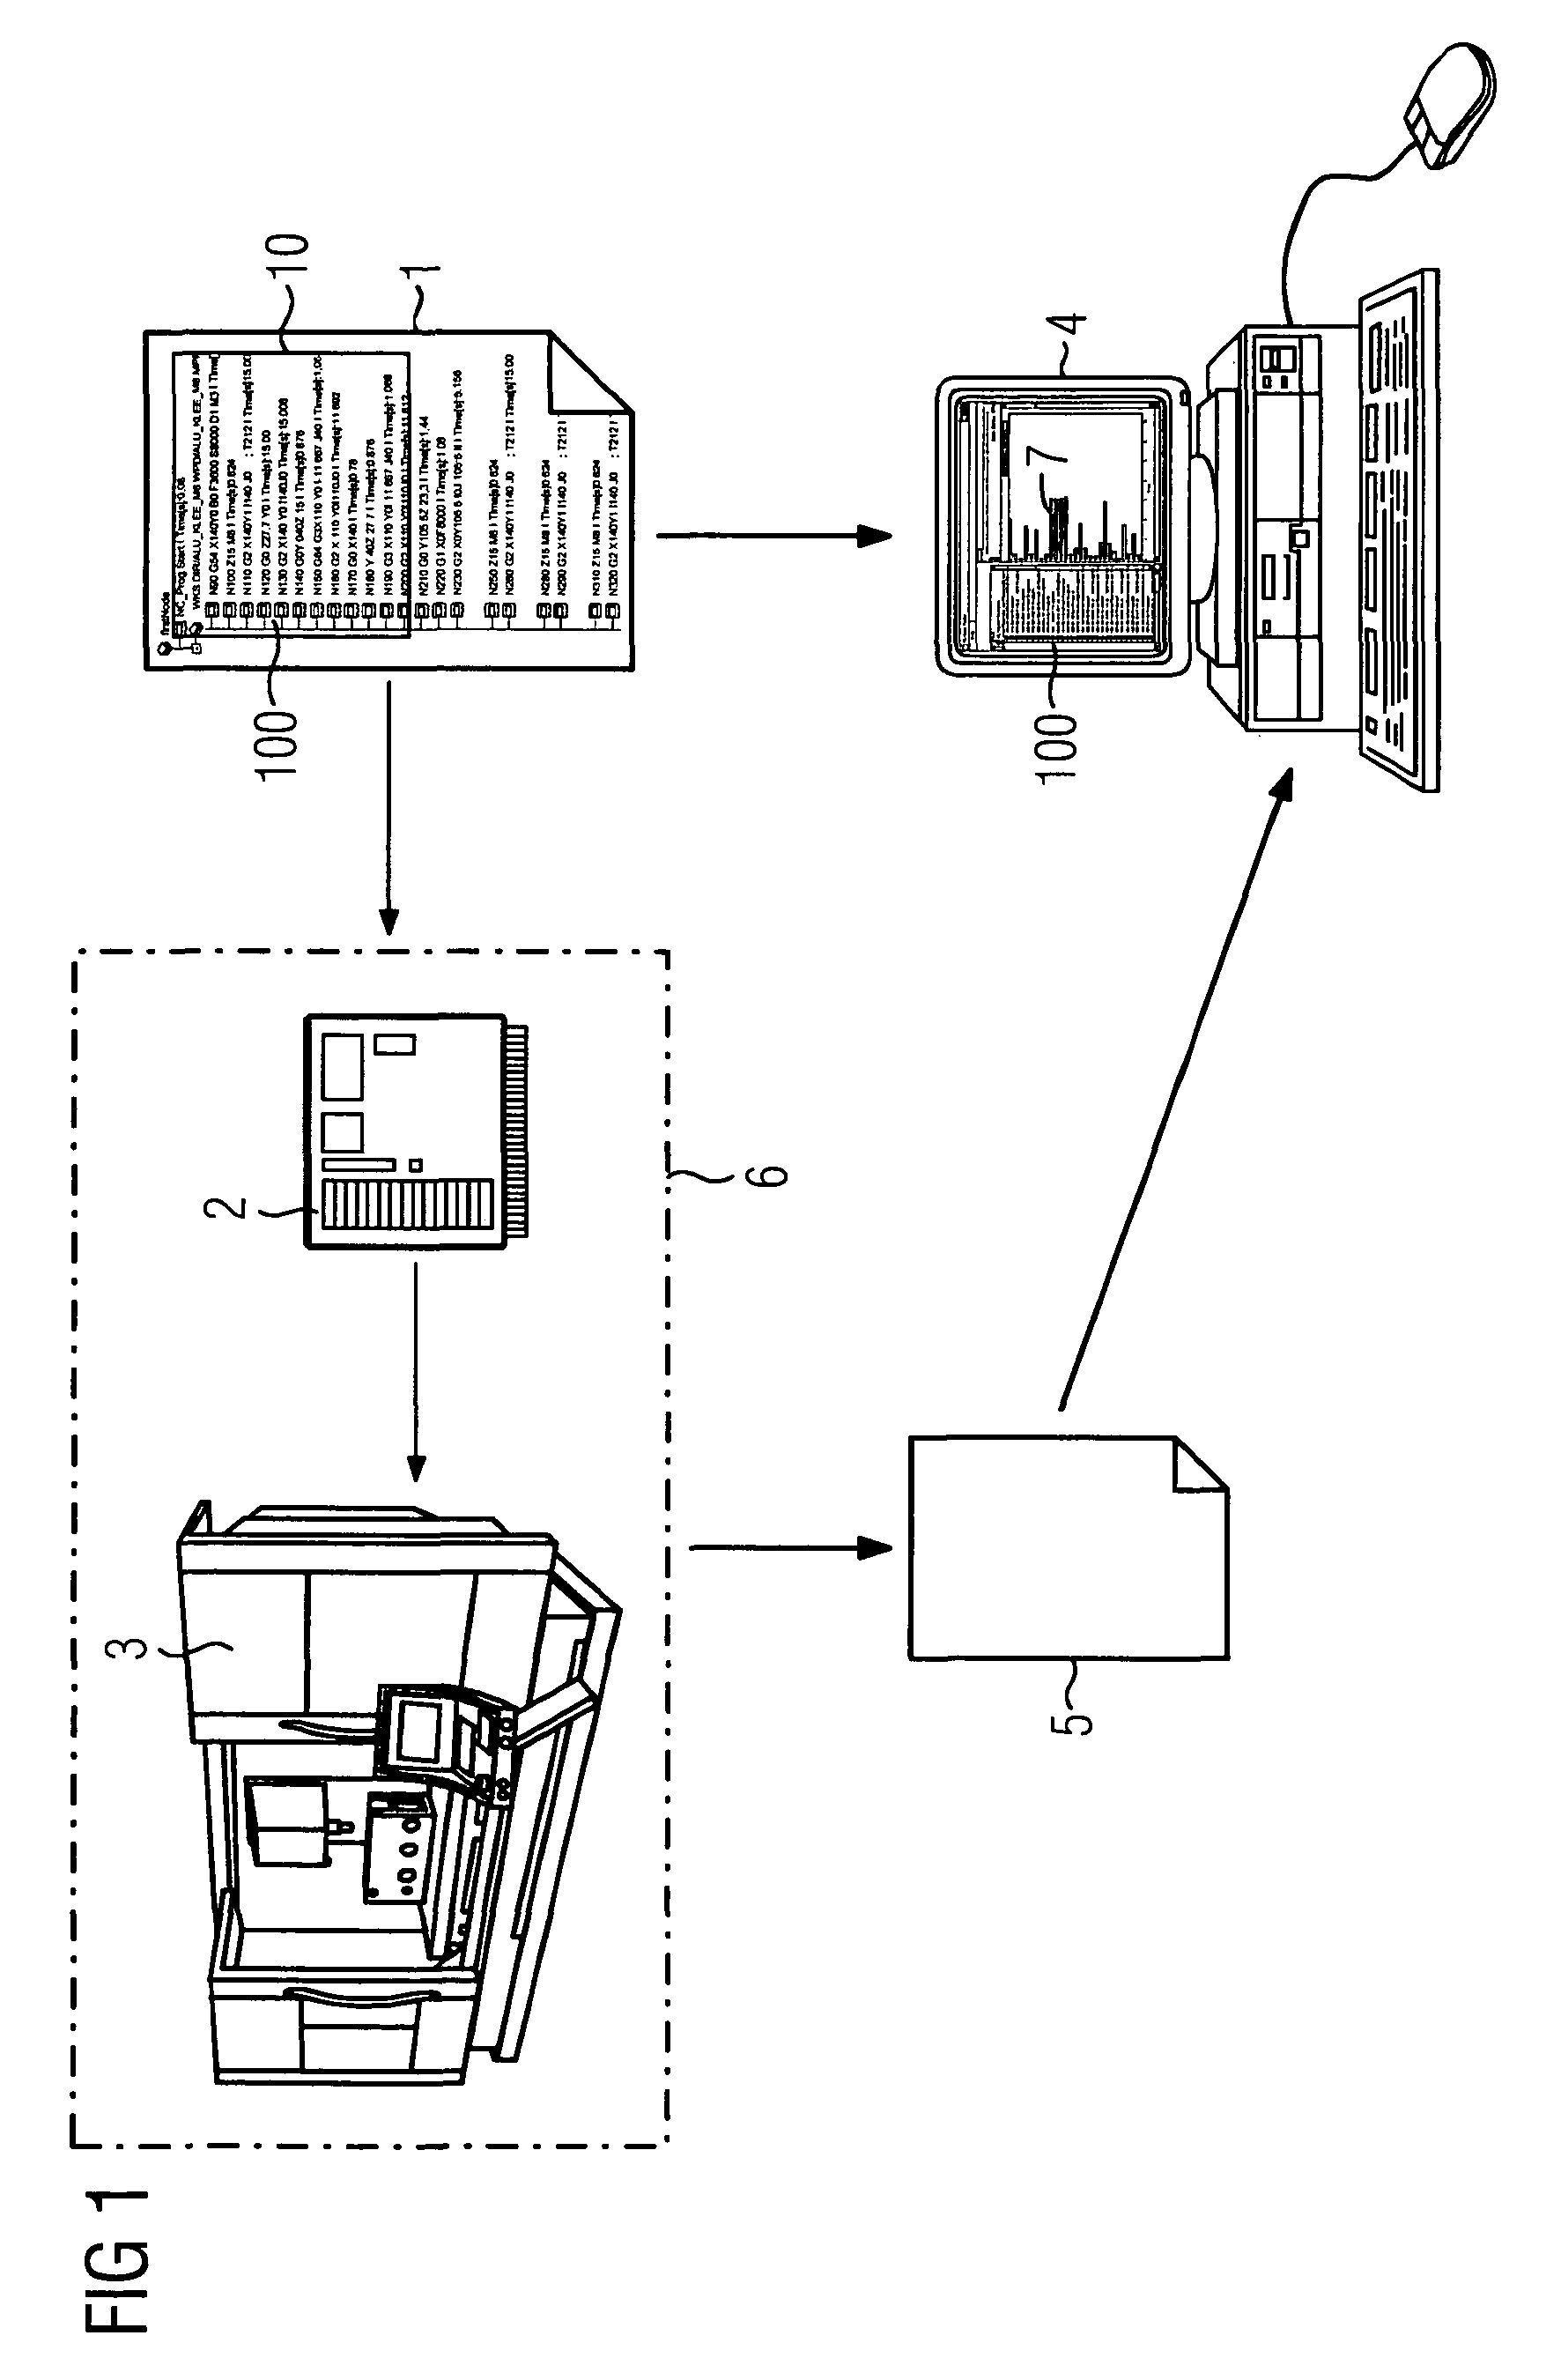 System and method for analyzing a production process